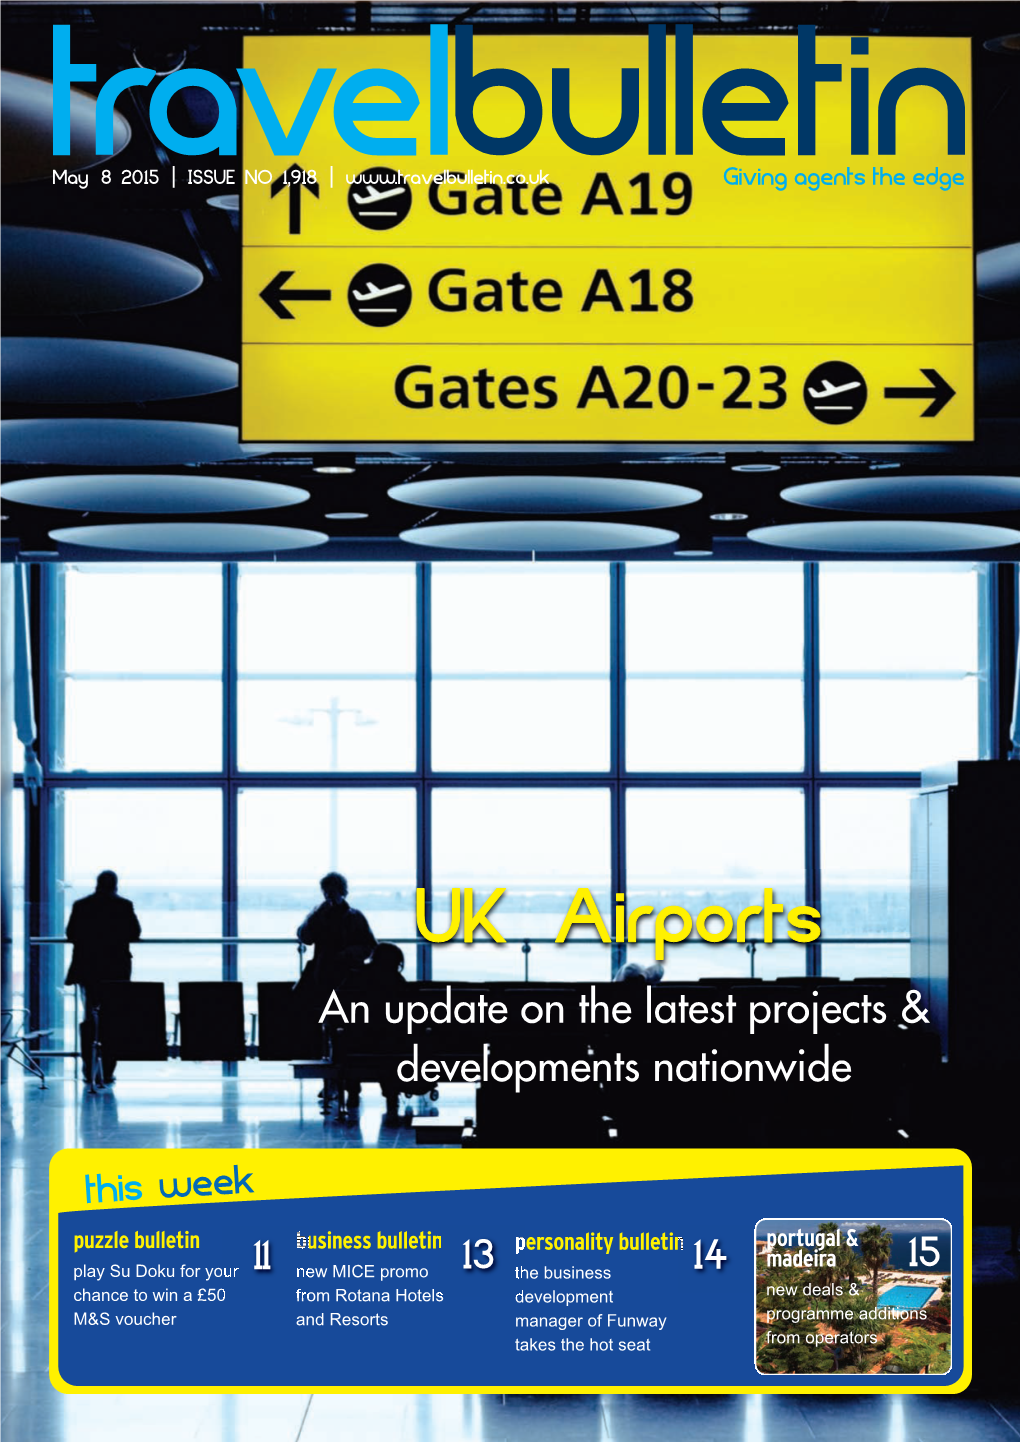 UK Airports an Update on the Latest Projects & Developments Nationwide